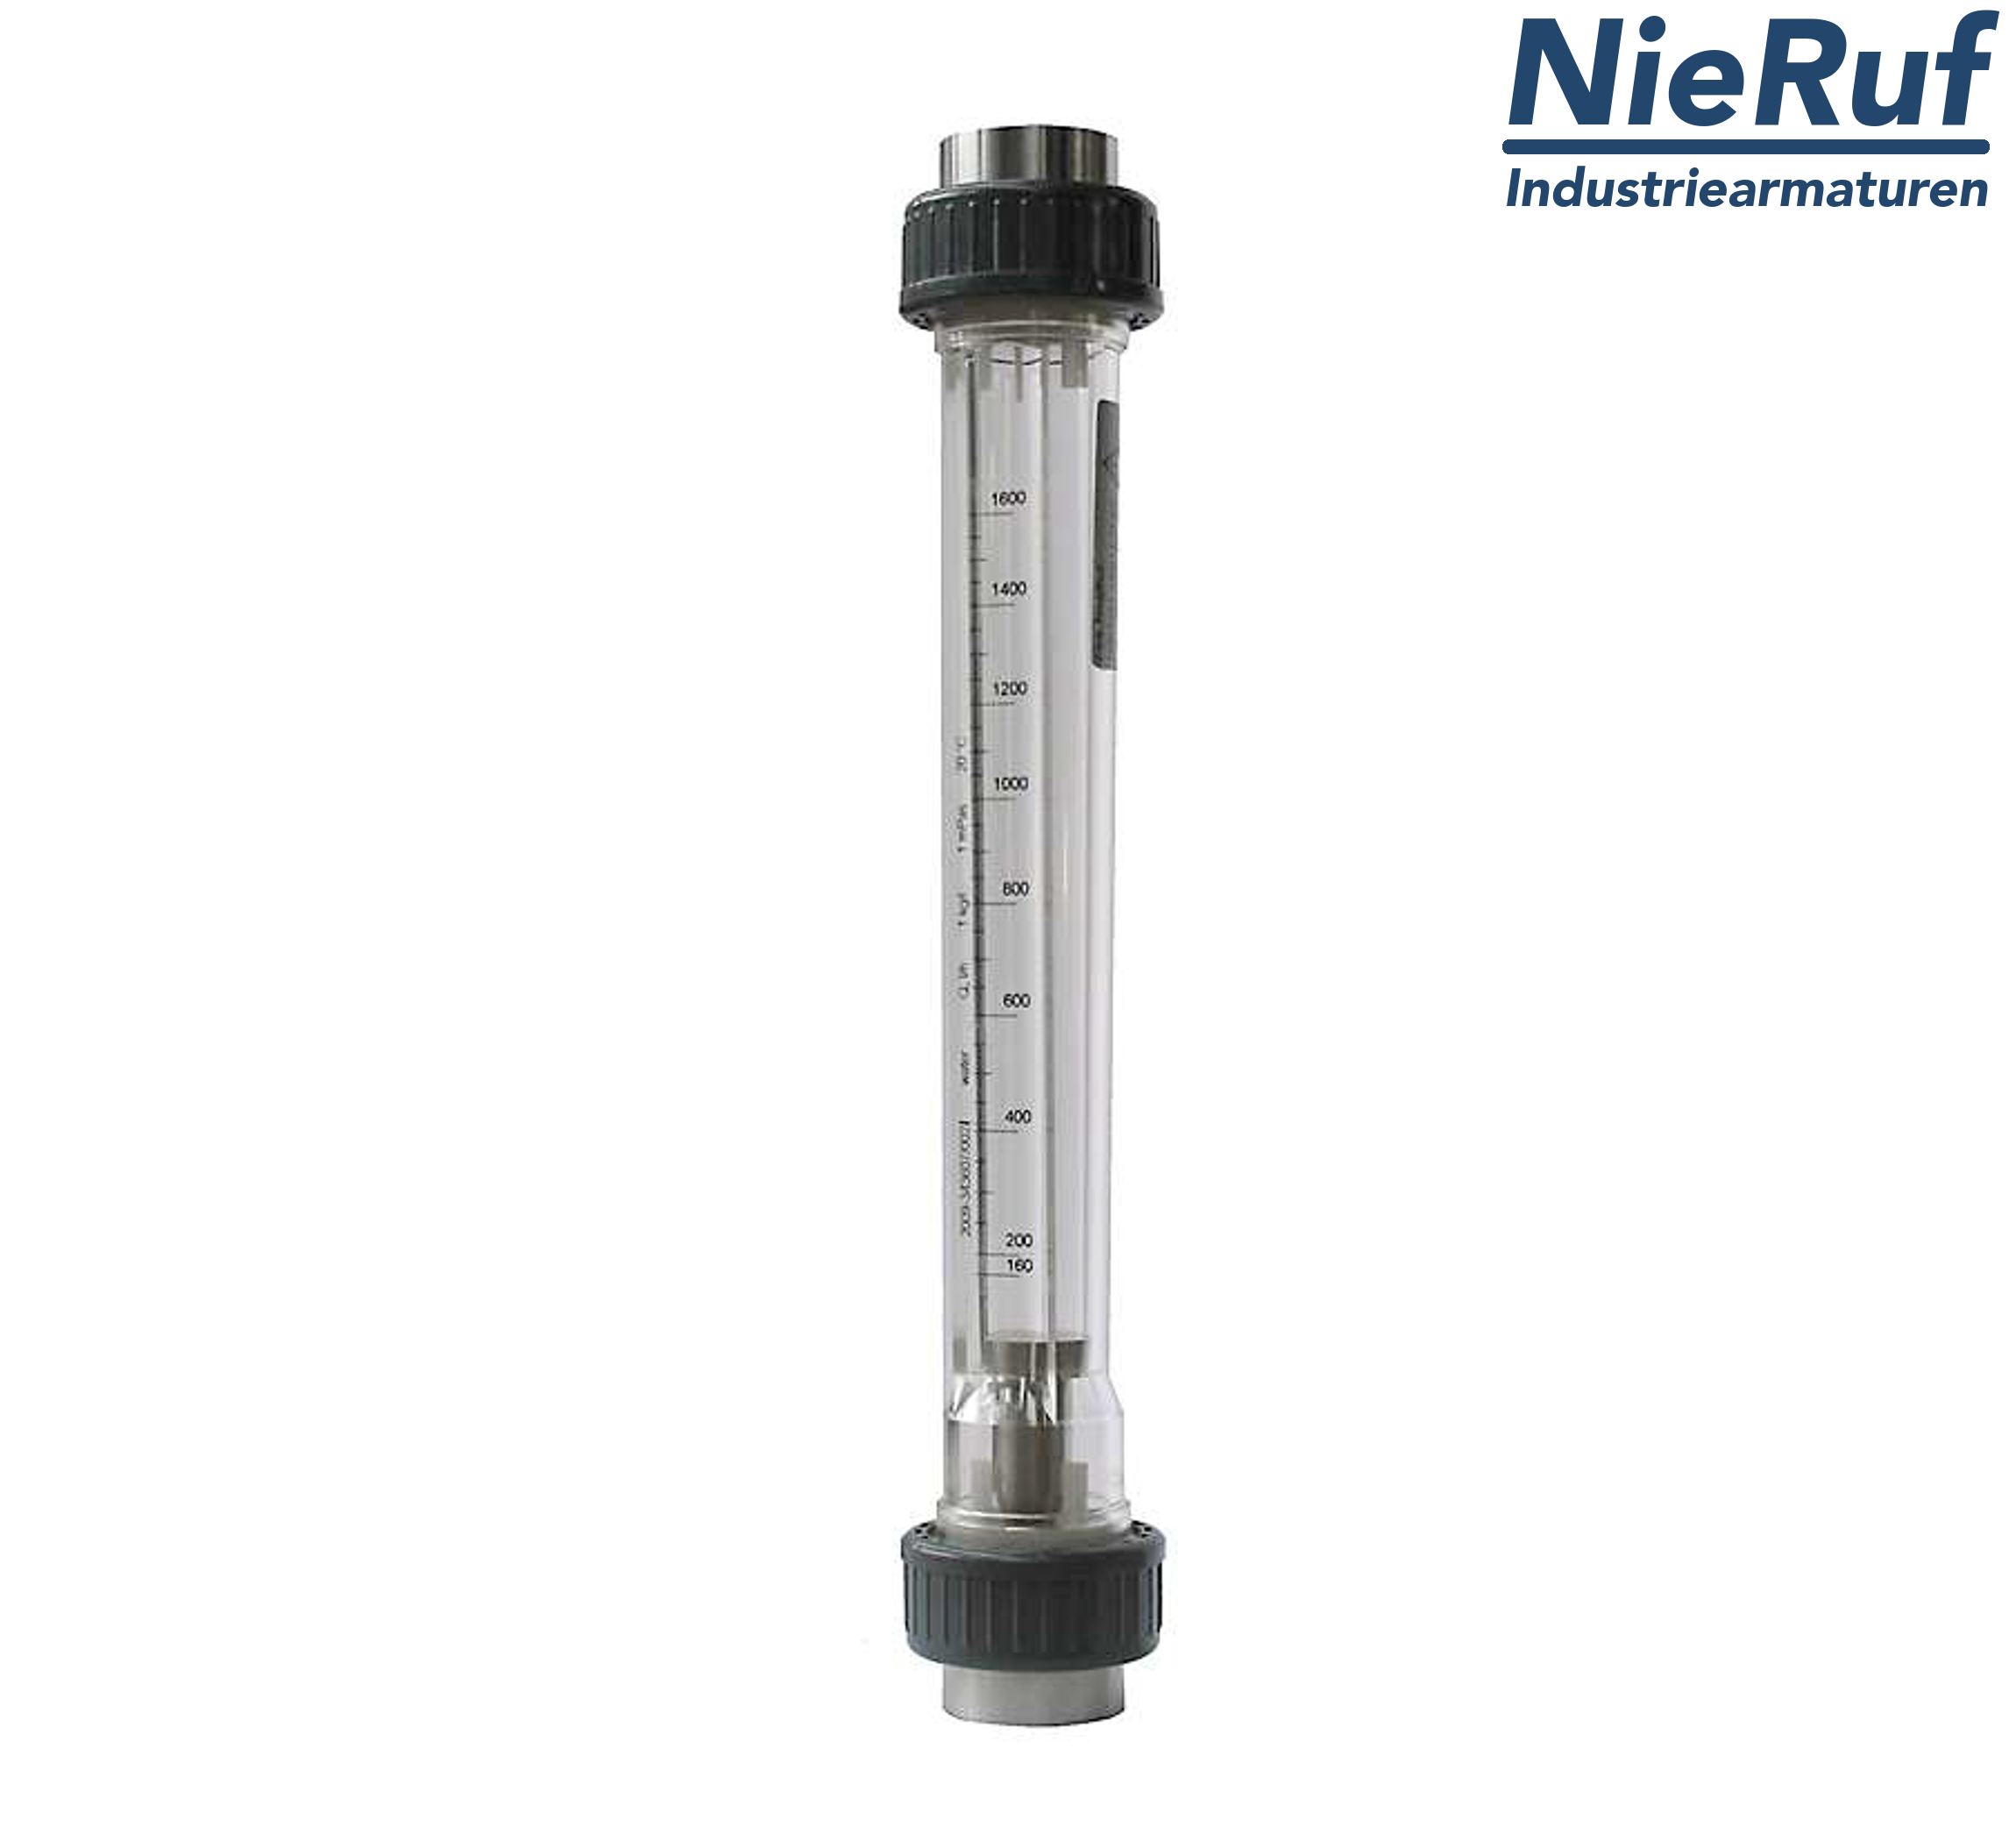 Variable area flowmeter 3/4" inch 160.0 - 1600 l/h water FKM